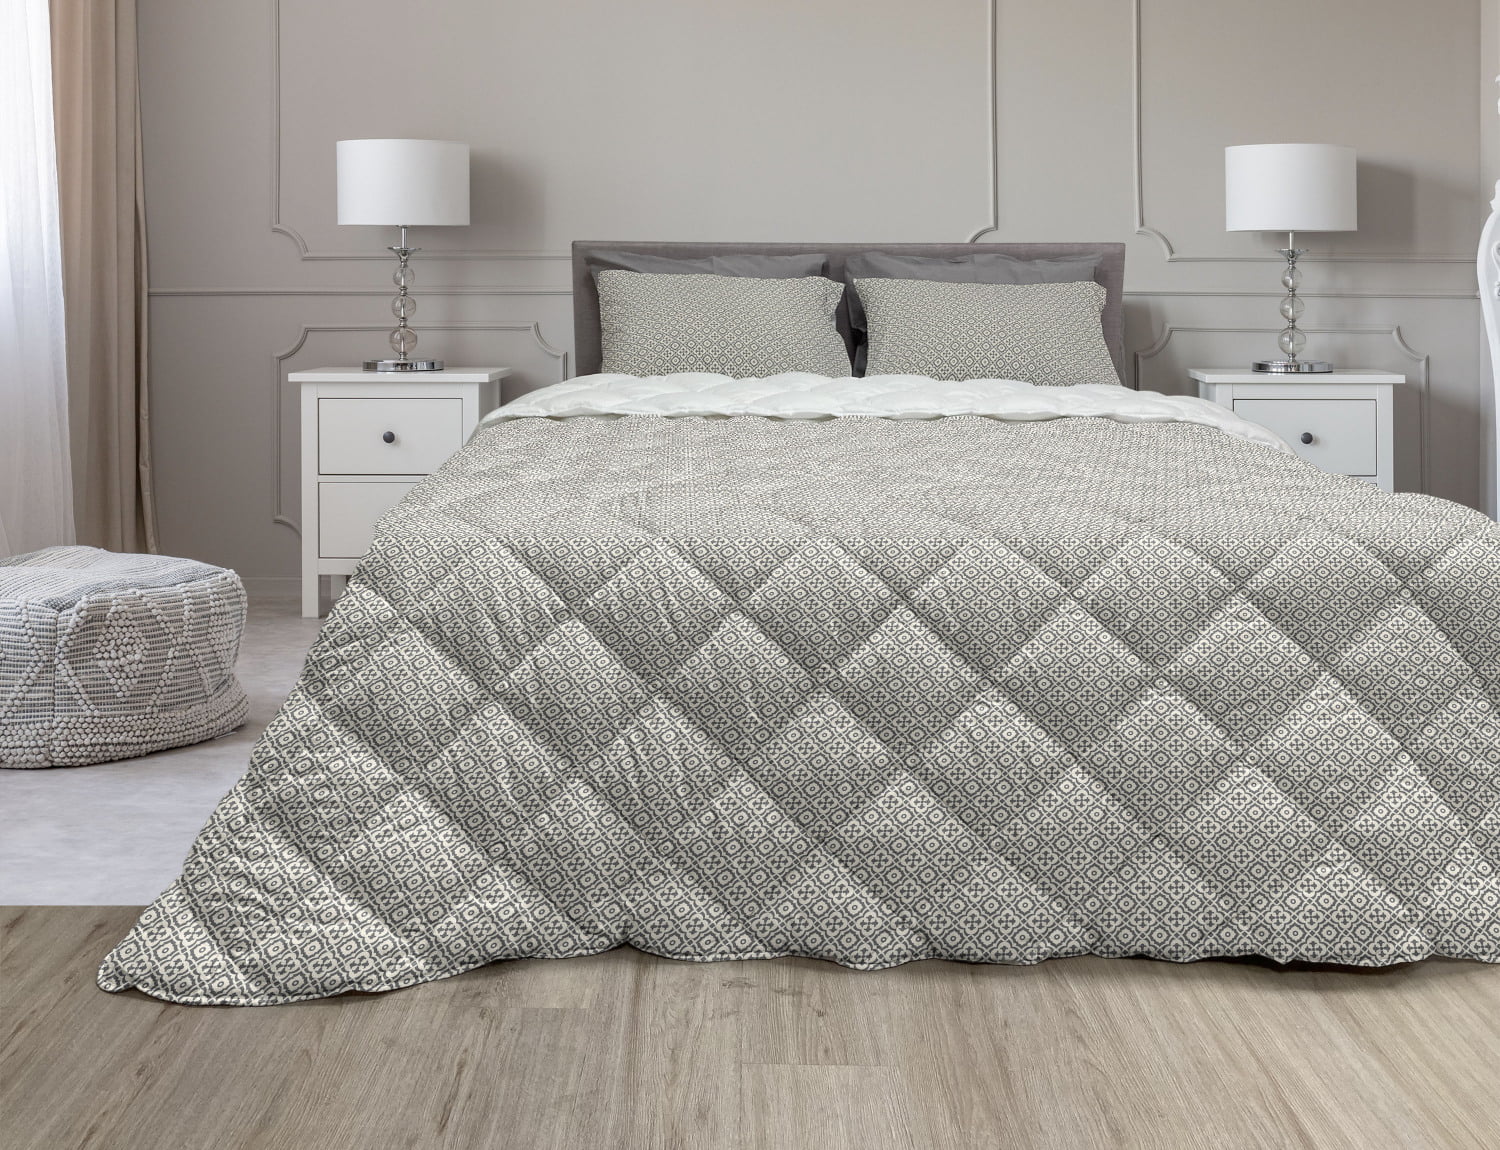 Twin Full Queen King Bed Taupe Beige Pinsonic Quilted 3 pc Comforter Set Bedding